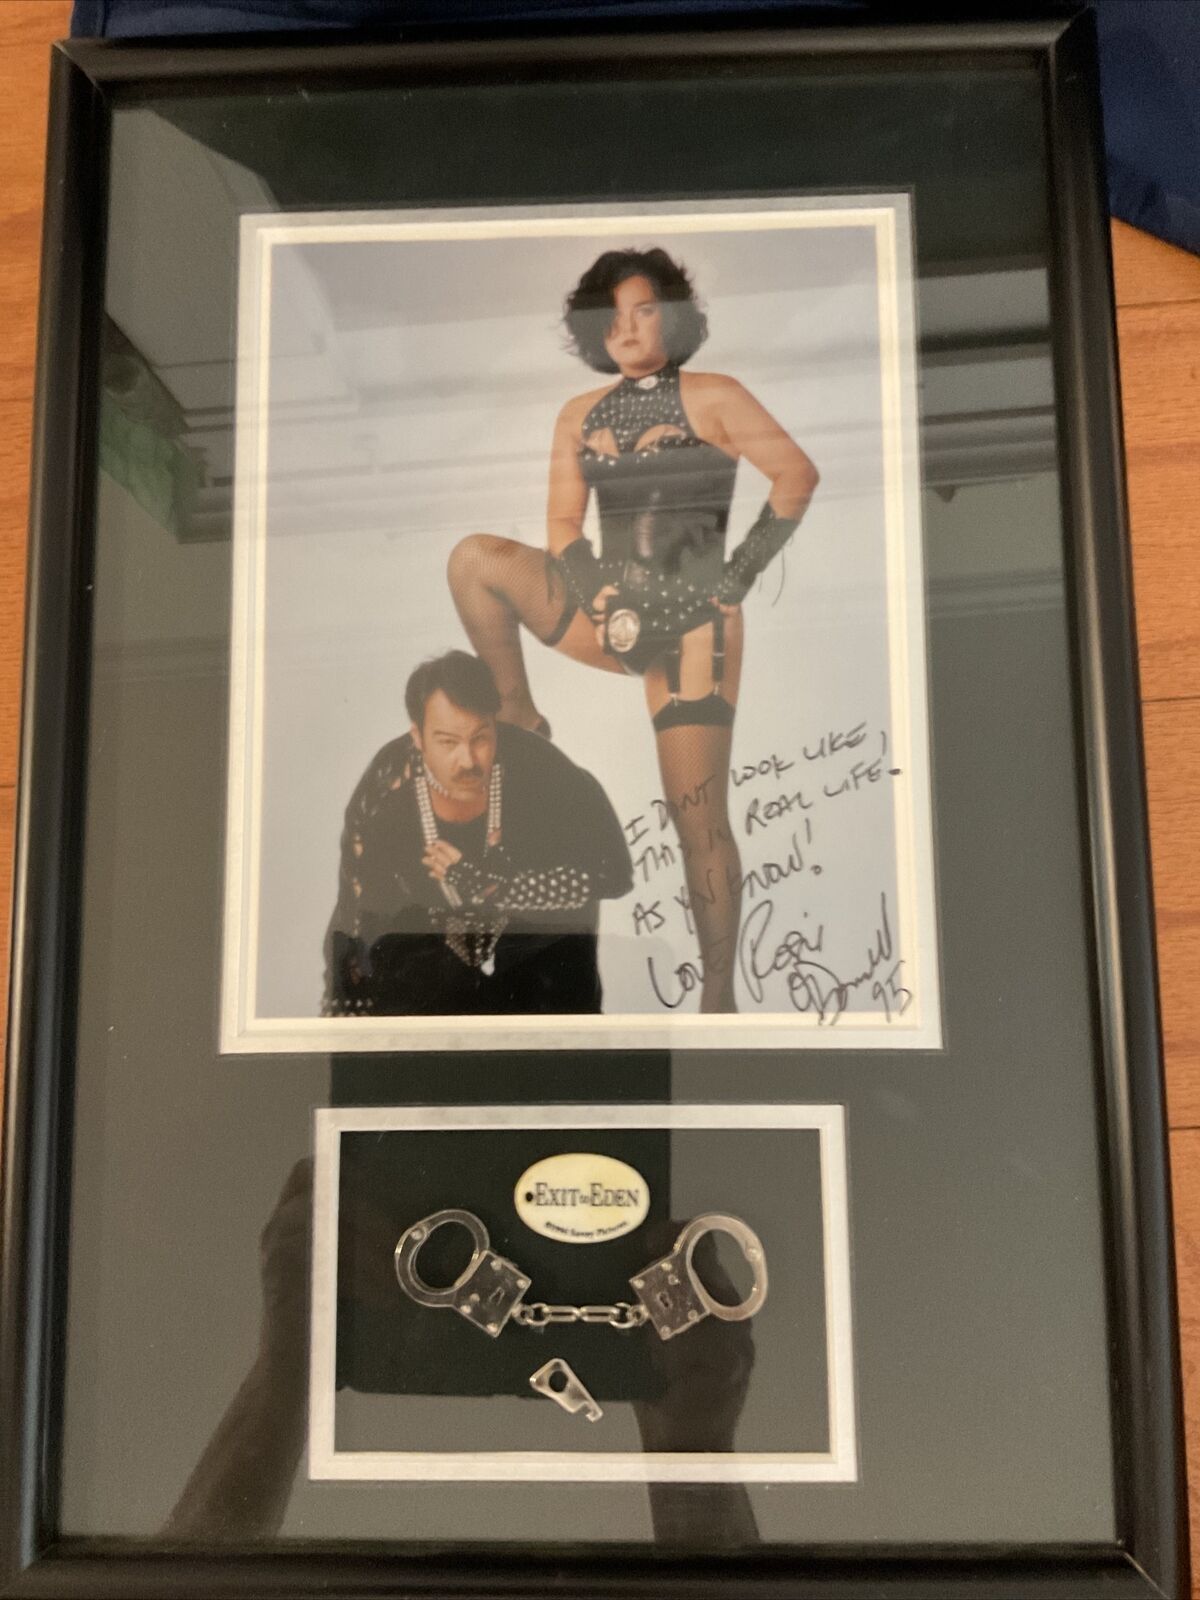 Unusual Early Rosie O’Donnell Framed Autographed with Memorabilia Exit to Eden